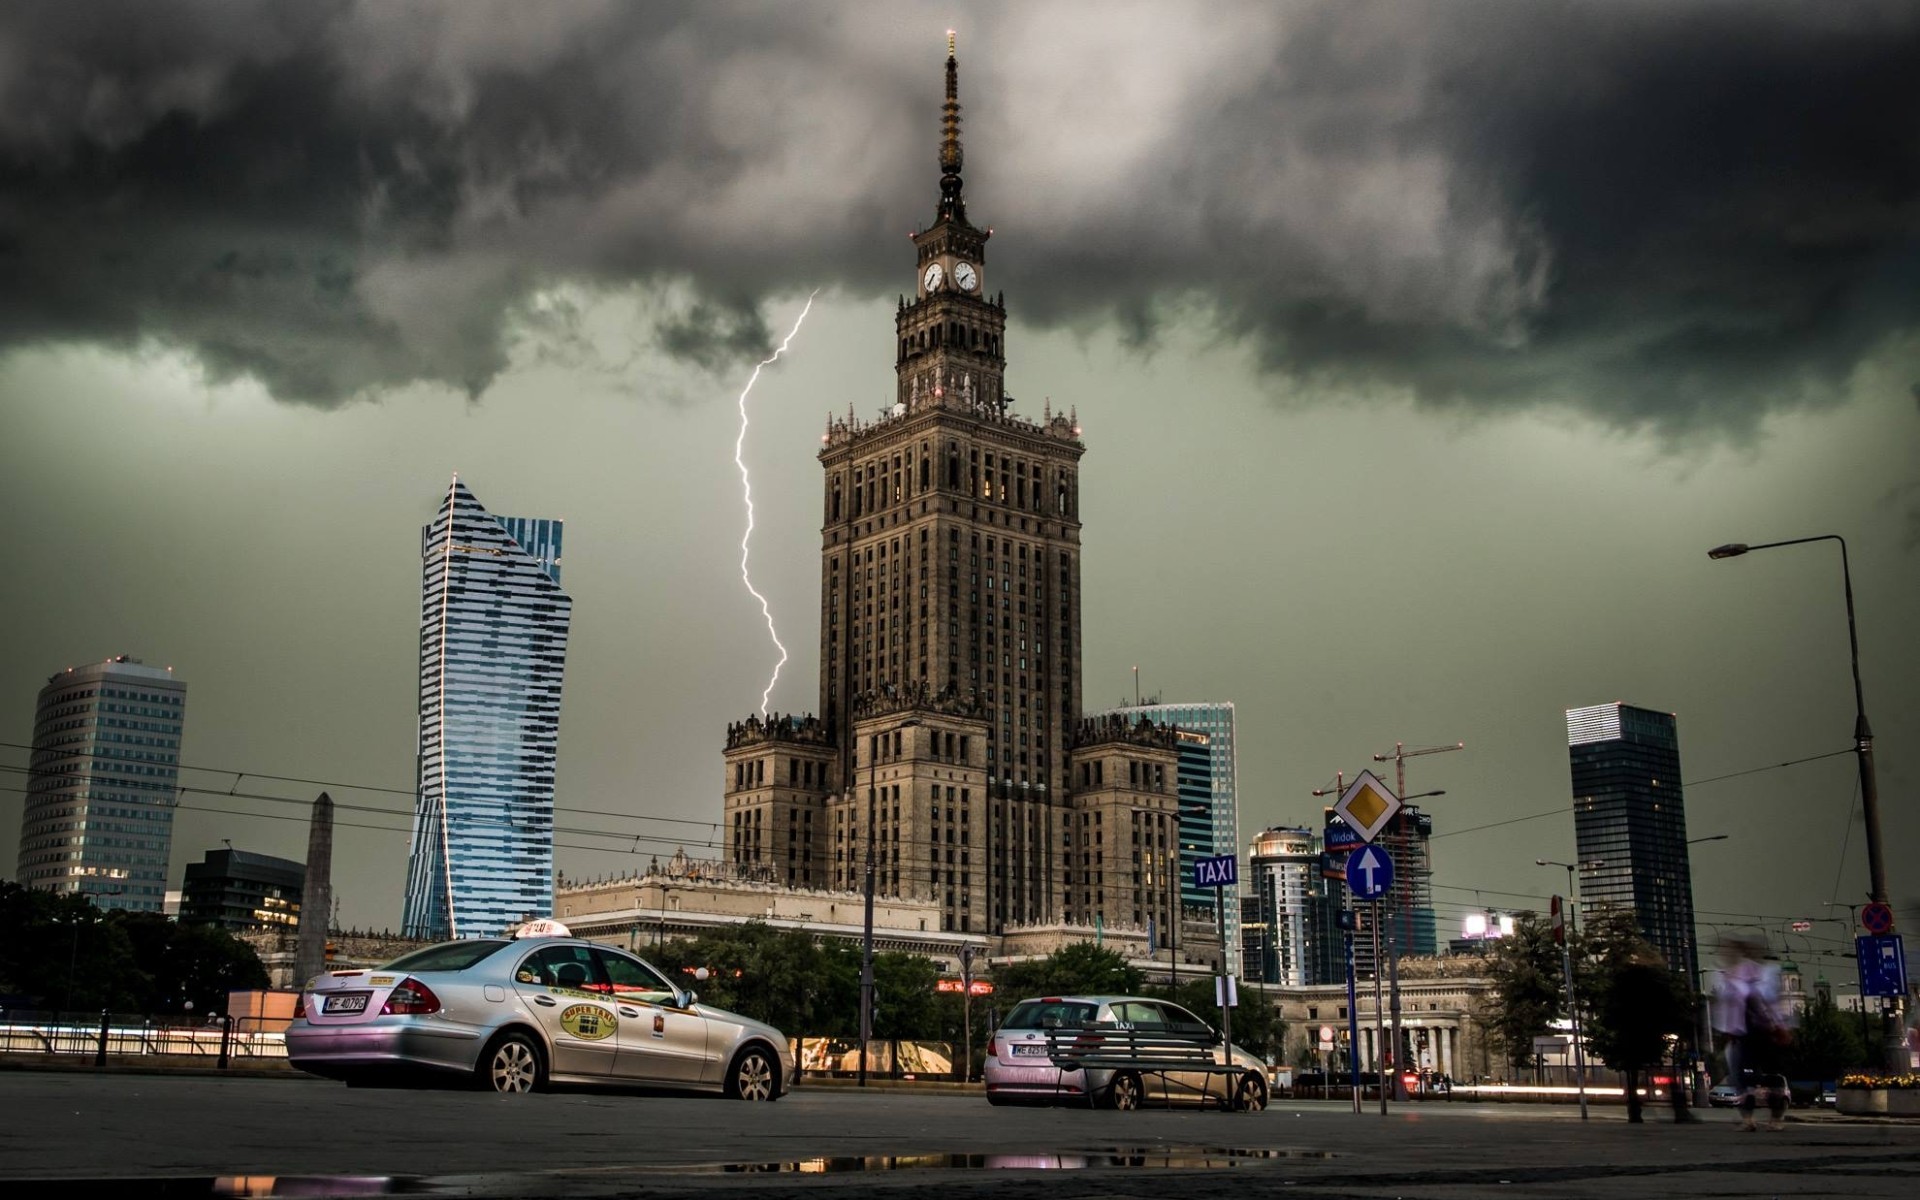 city, Cityscape, Clouds, Lightning, Building, Architecture, Car, Clock Towers, Warsaw, Poland Wallpaper